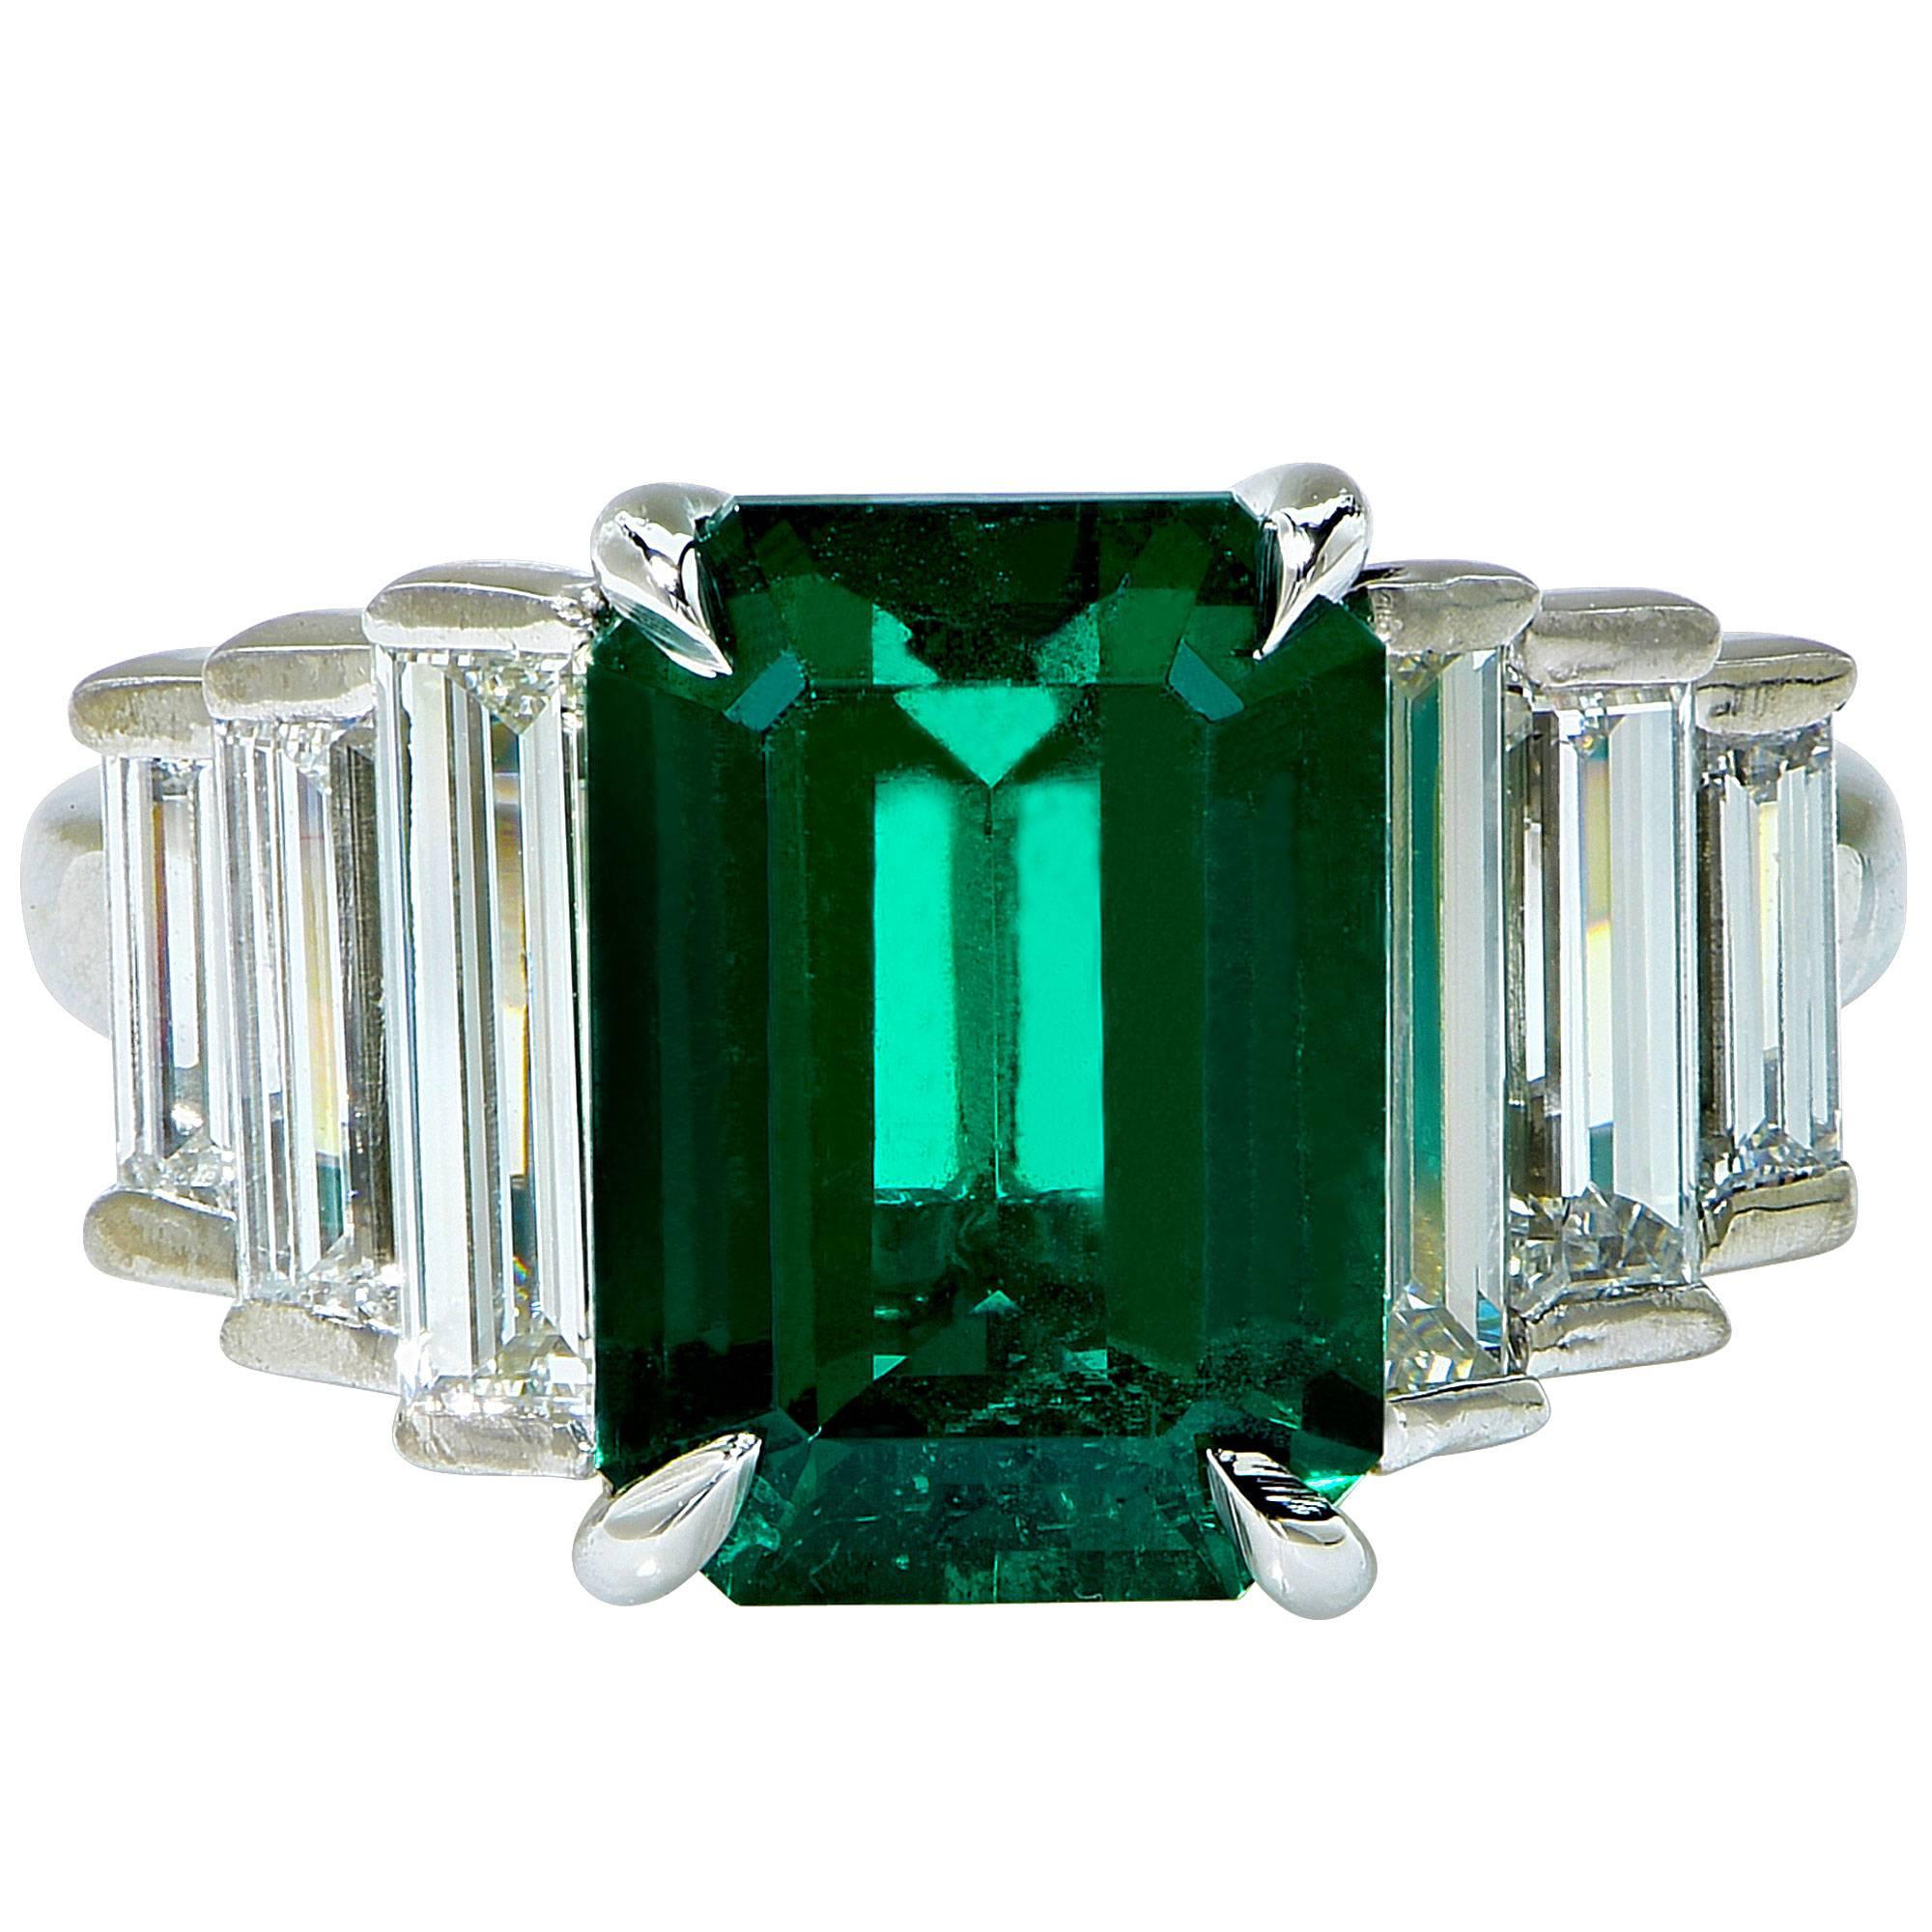 Platinum custom-made ring containing a 3.33ct gorgeous emerald cut Zambian emerald with an AGL Report stating insignificant treatment. The emerald is flanked by 6 long diamond baguettes with a total weight of approximately 2cts, F color, VS